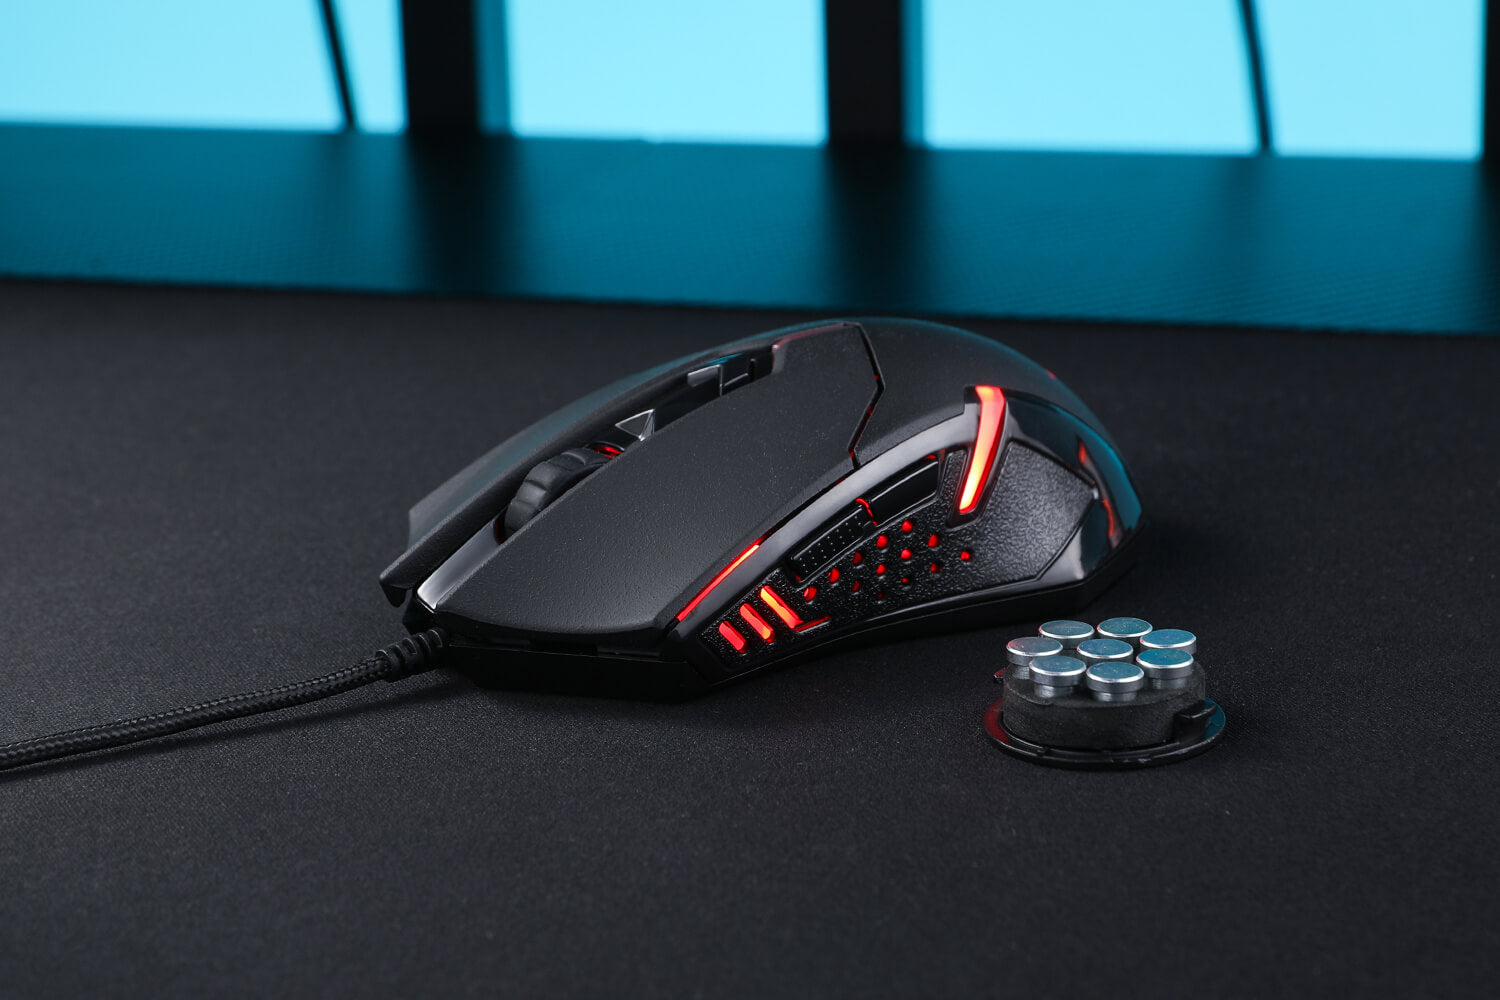 Redragon_S101_PC_Gaming_Keyboard_and_Mouse_Combo_3